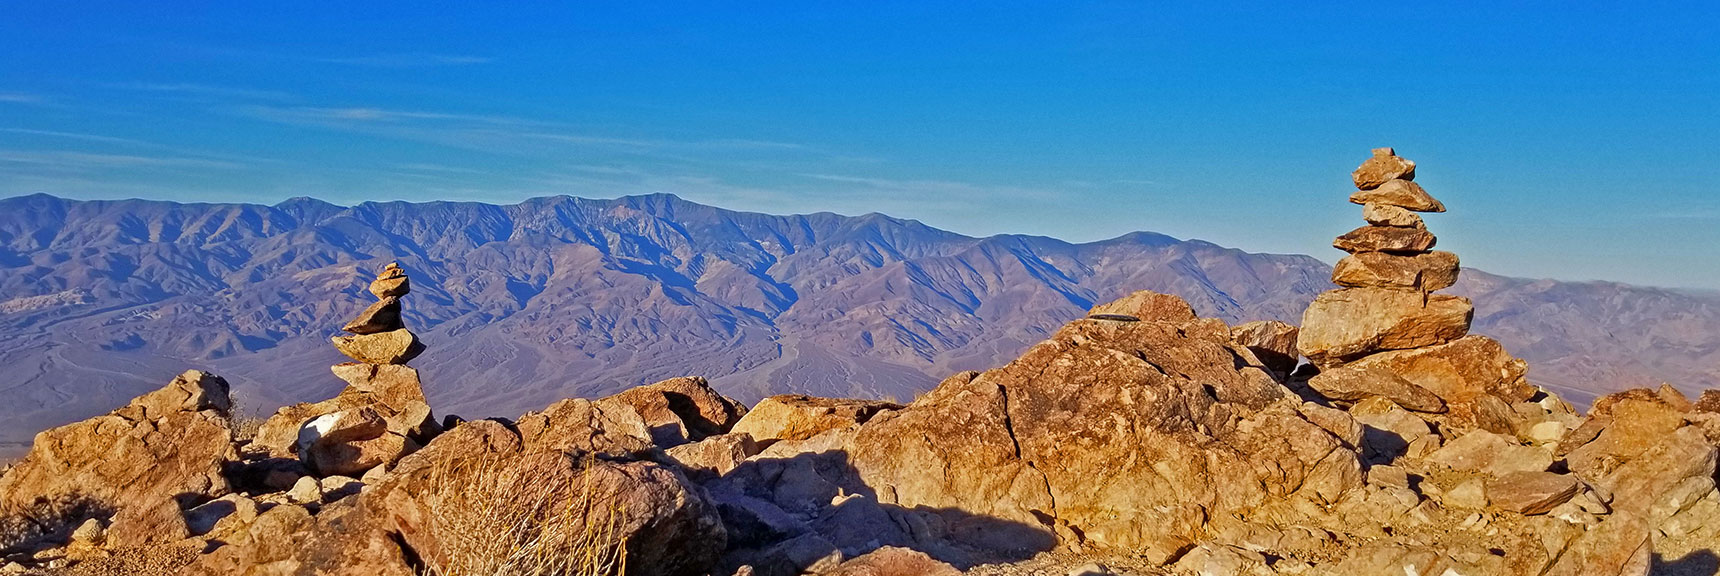 Panamint Range as Background to Cairns on Dante's Ridge | Dante's View to Mt. Perry | Death Valley National Park, CA